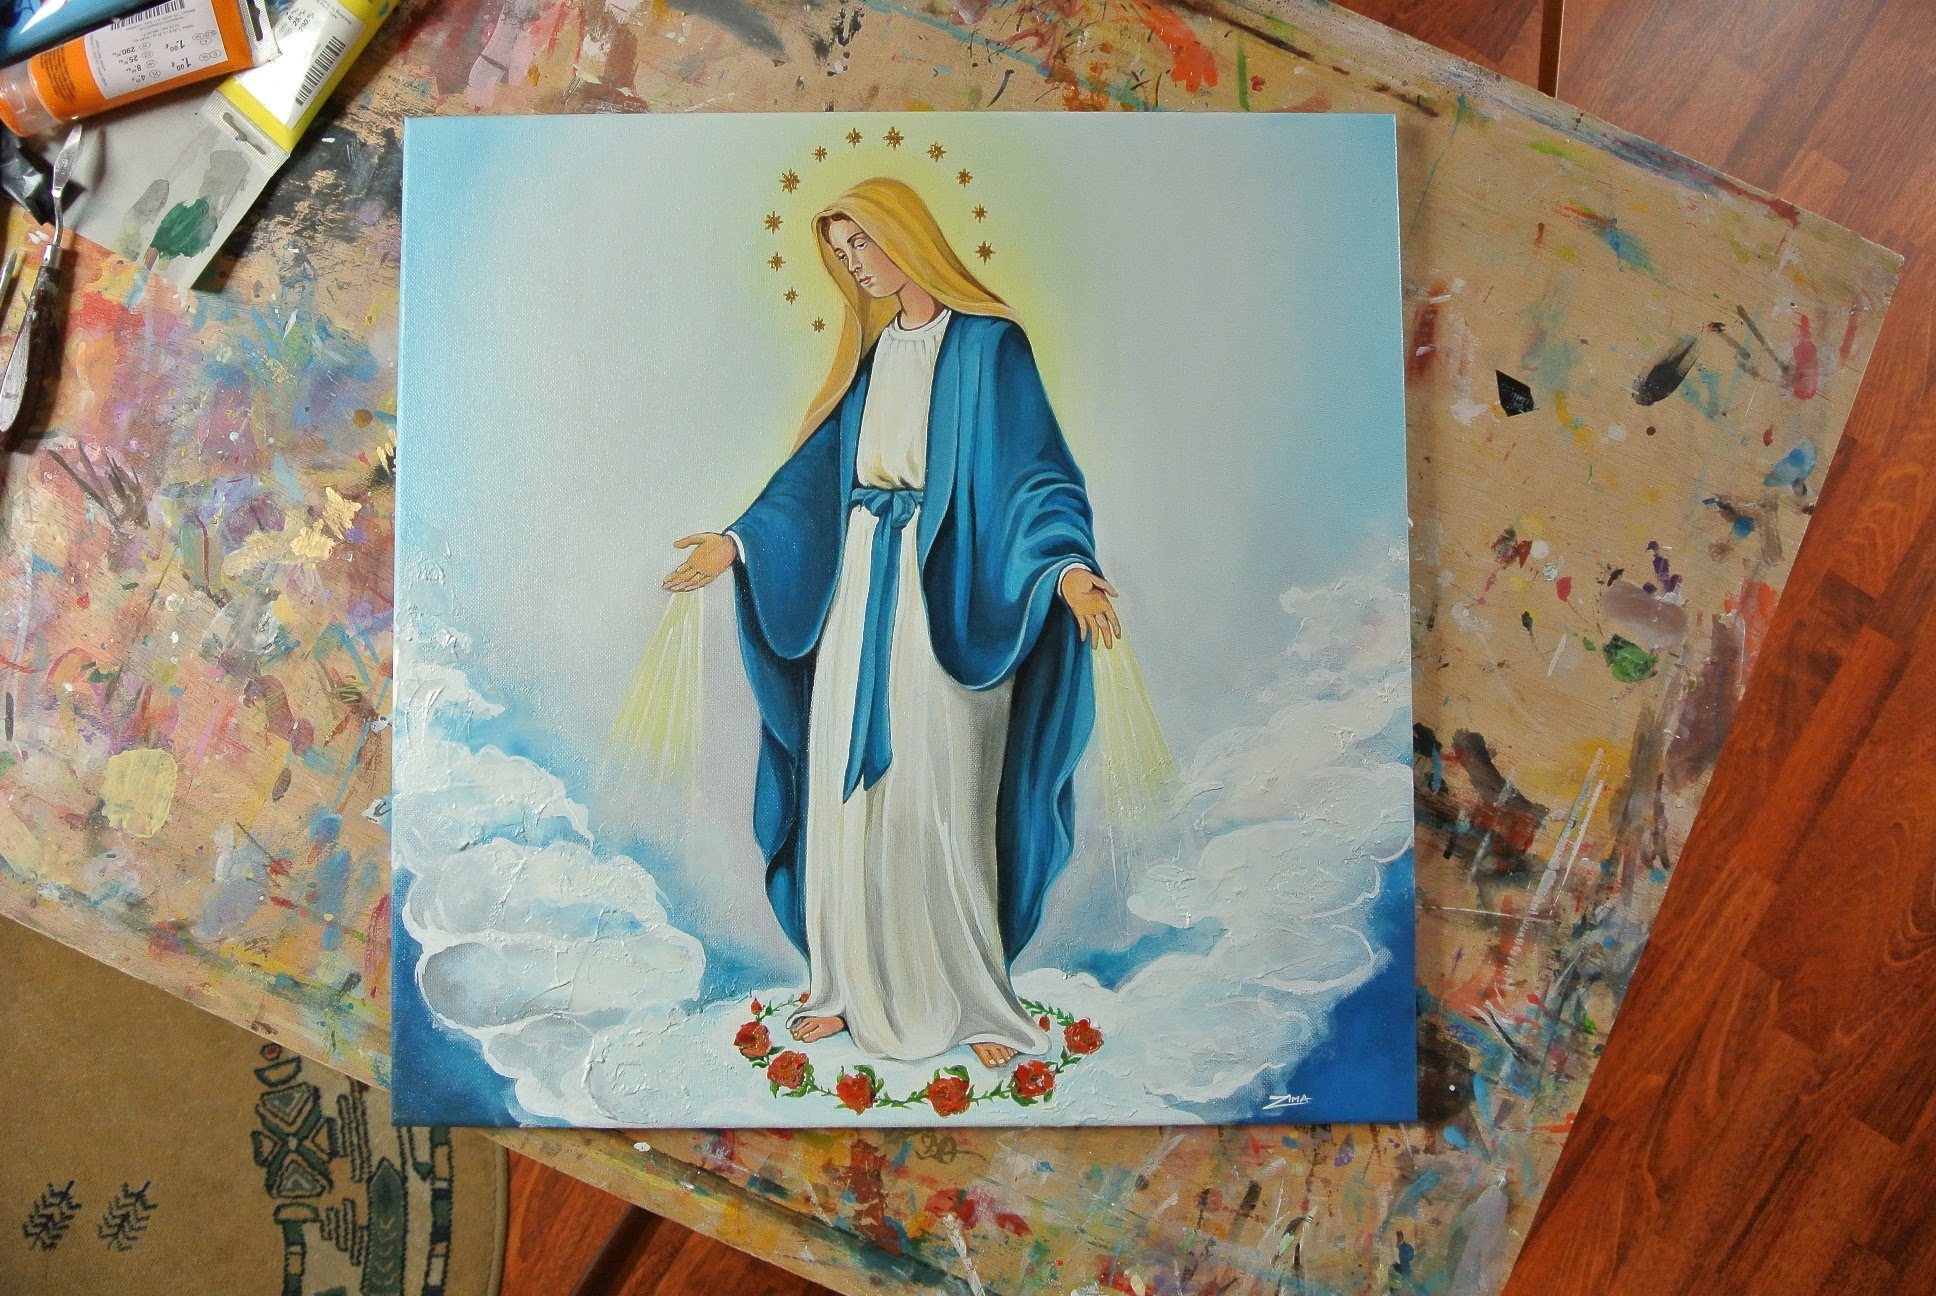 Virgin Mary Painting on Canvas - YouTube